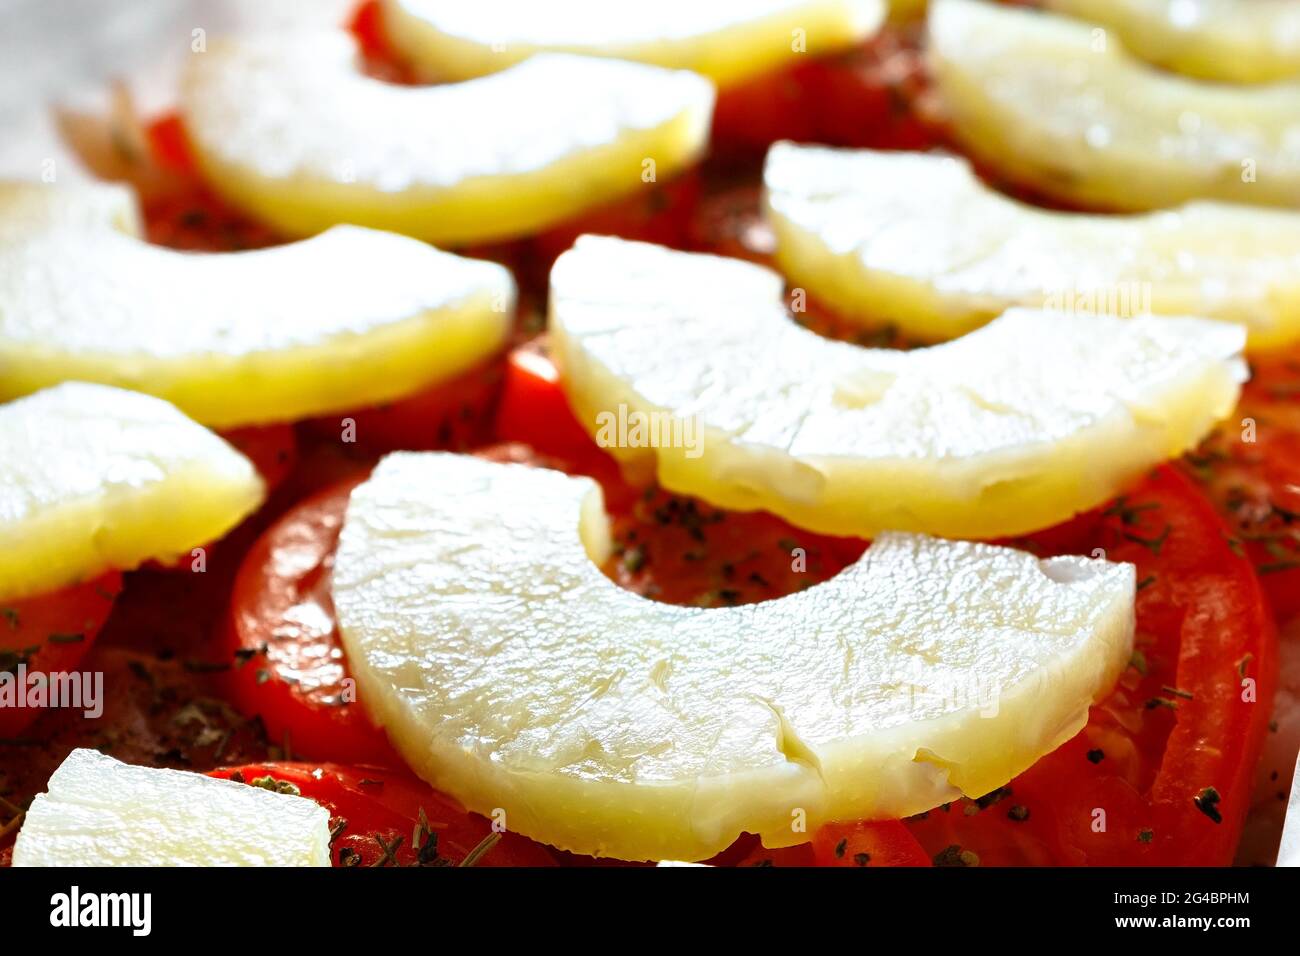 The combination of vegetables and fruits in the food. Cooking pineapples with tomatoes. A recipe for a delicious dish for quick cooking at home. Pineapple slices with tomatoes are ready for baking. Top view Stock Photo